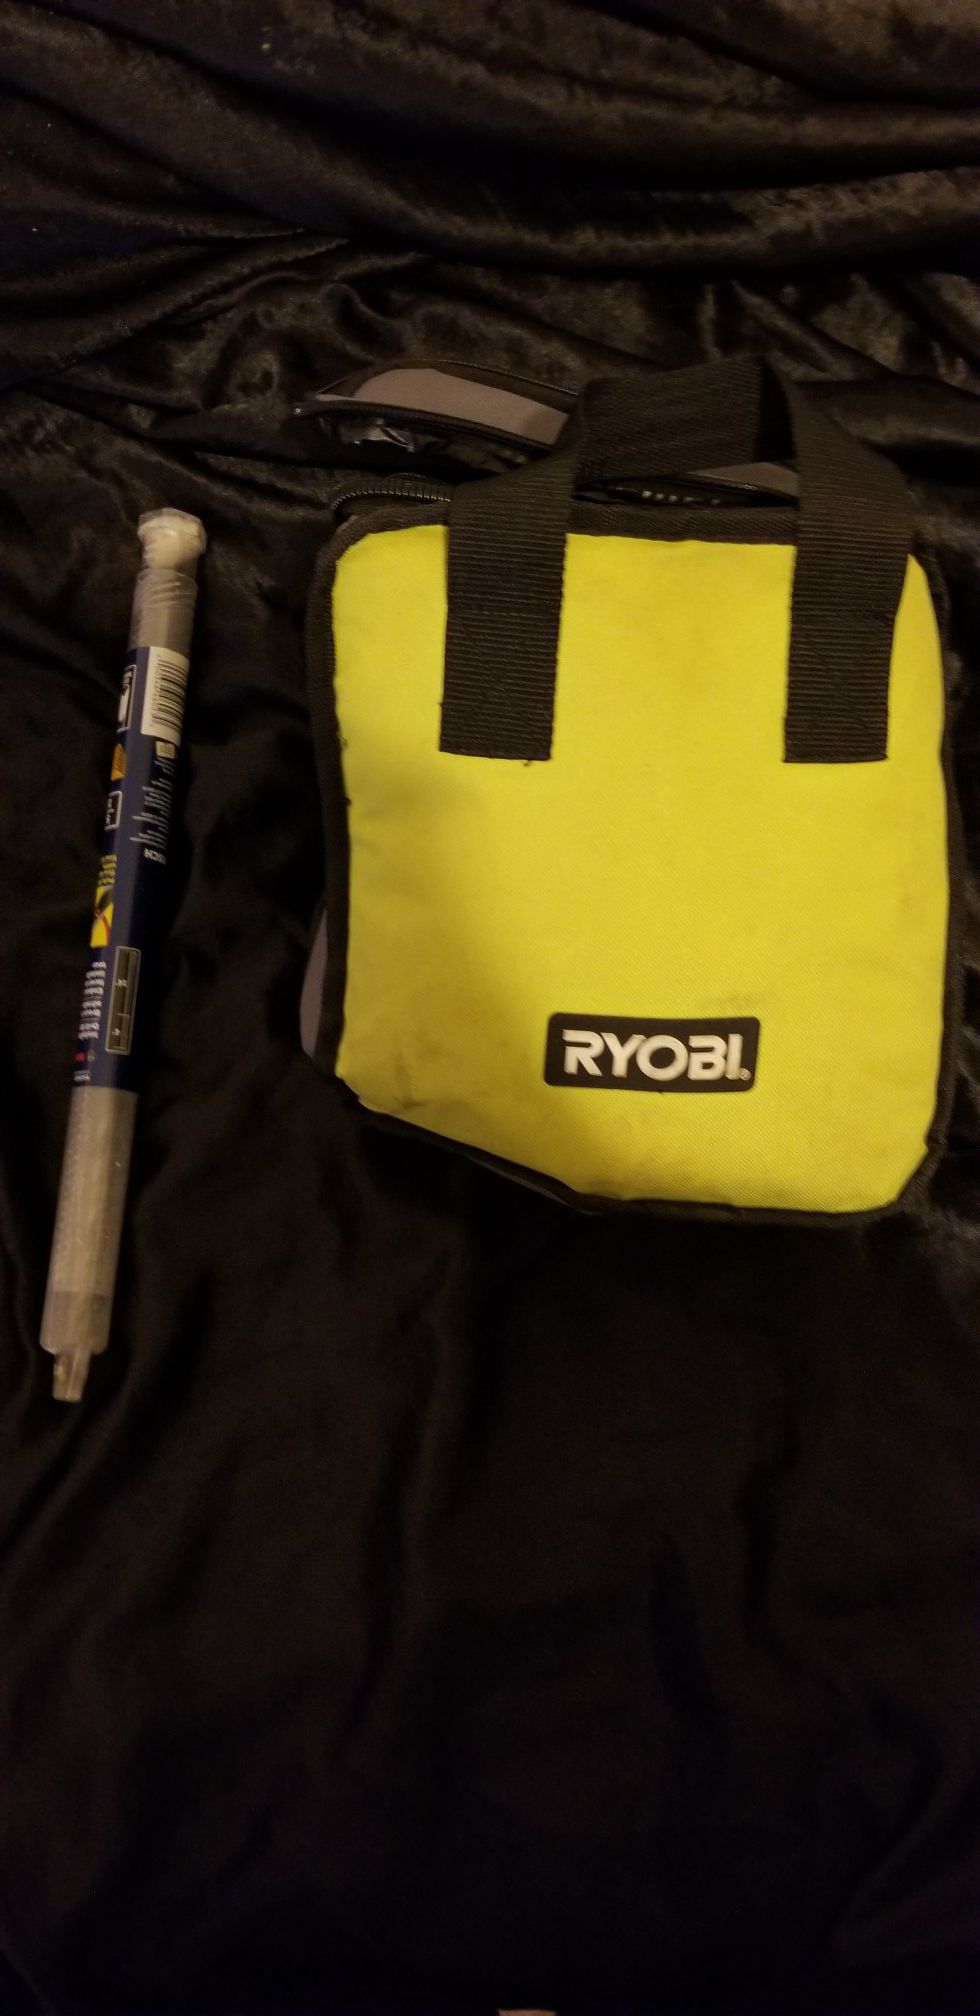 Ryobi drill and drill bit package